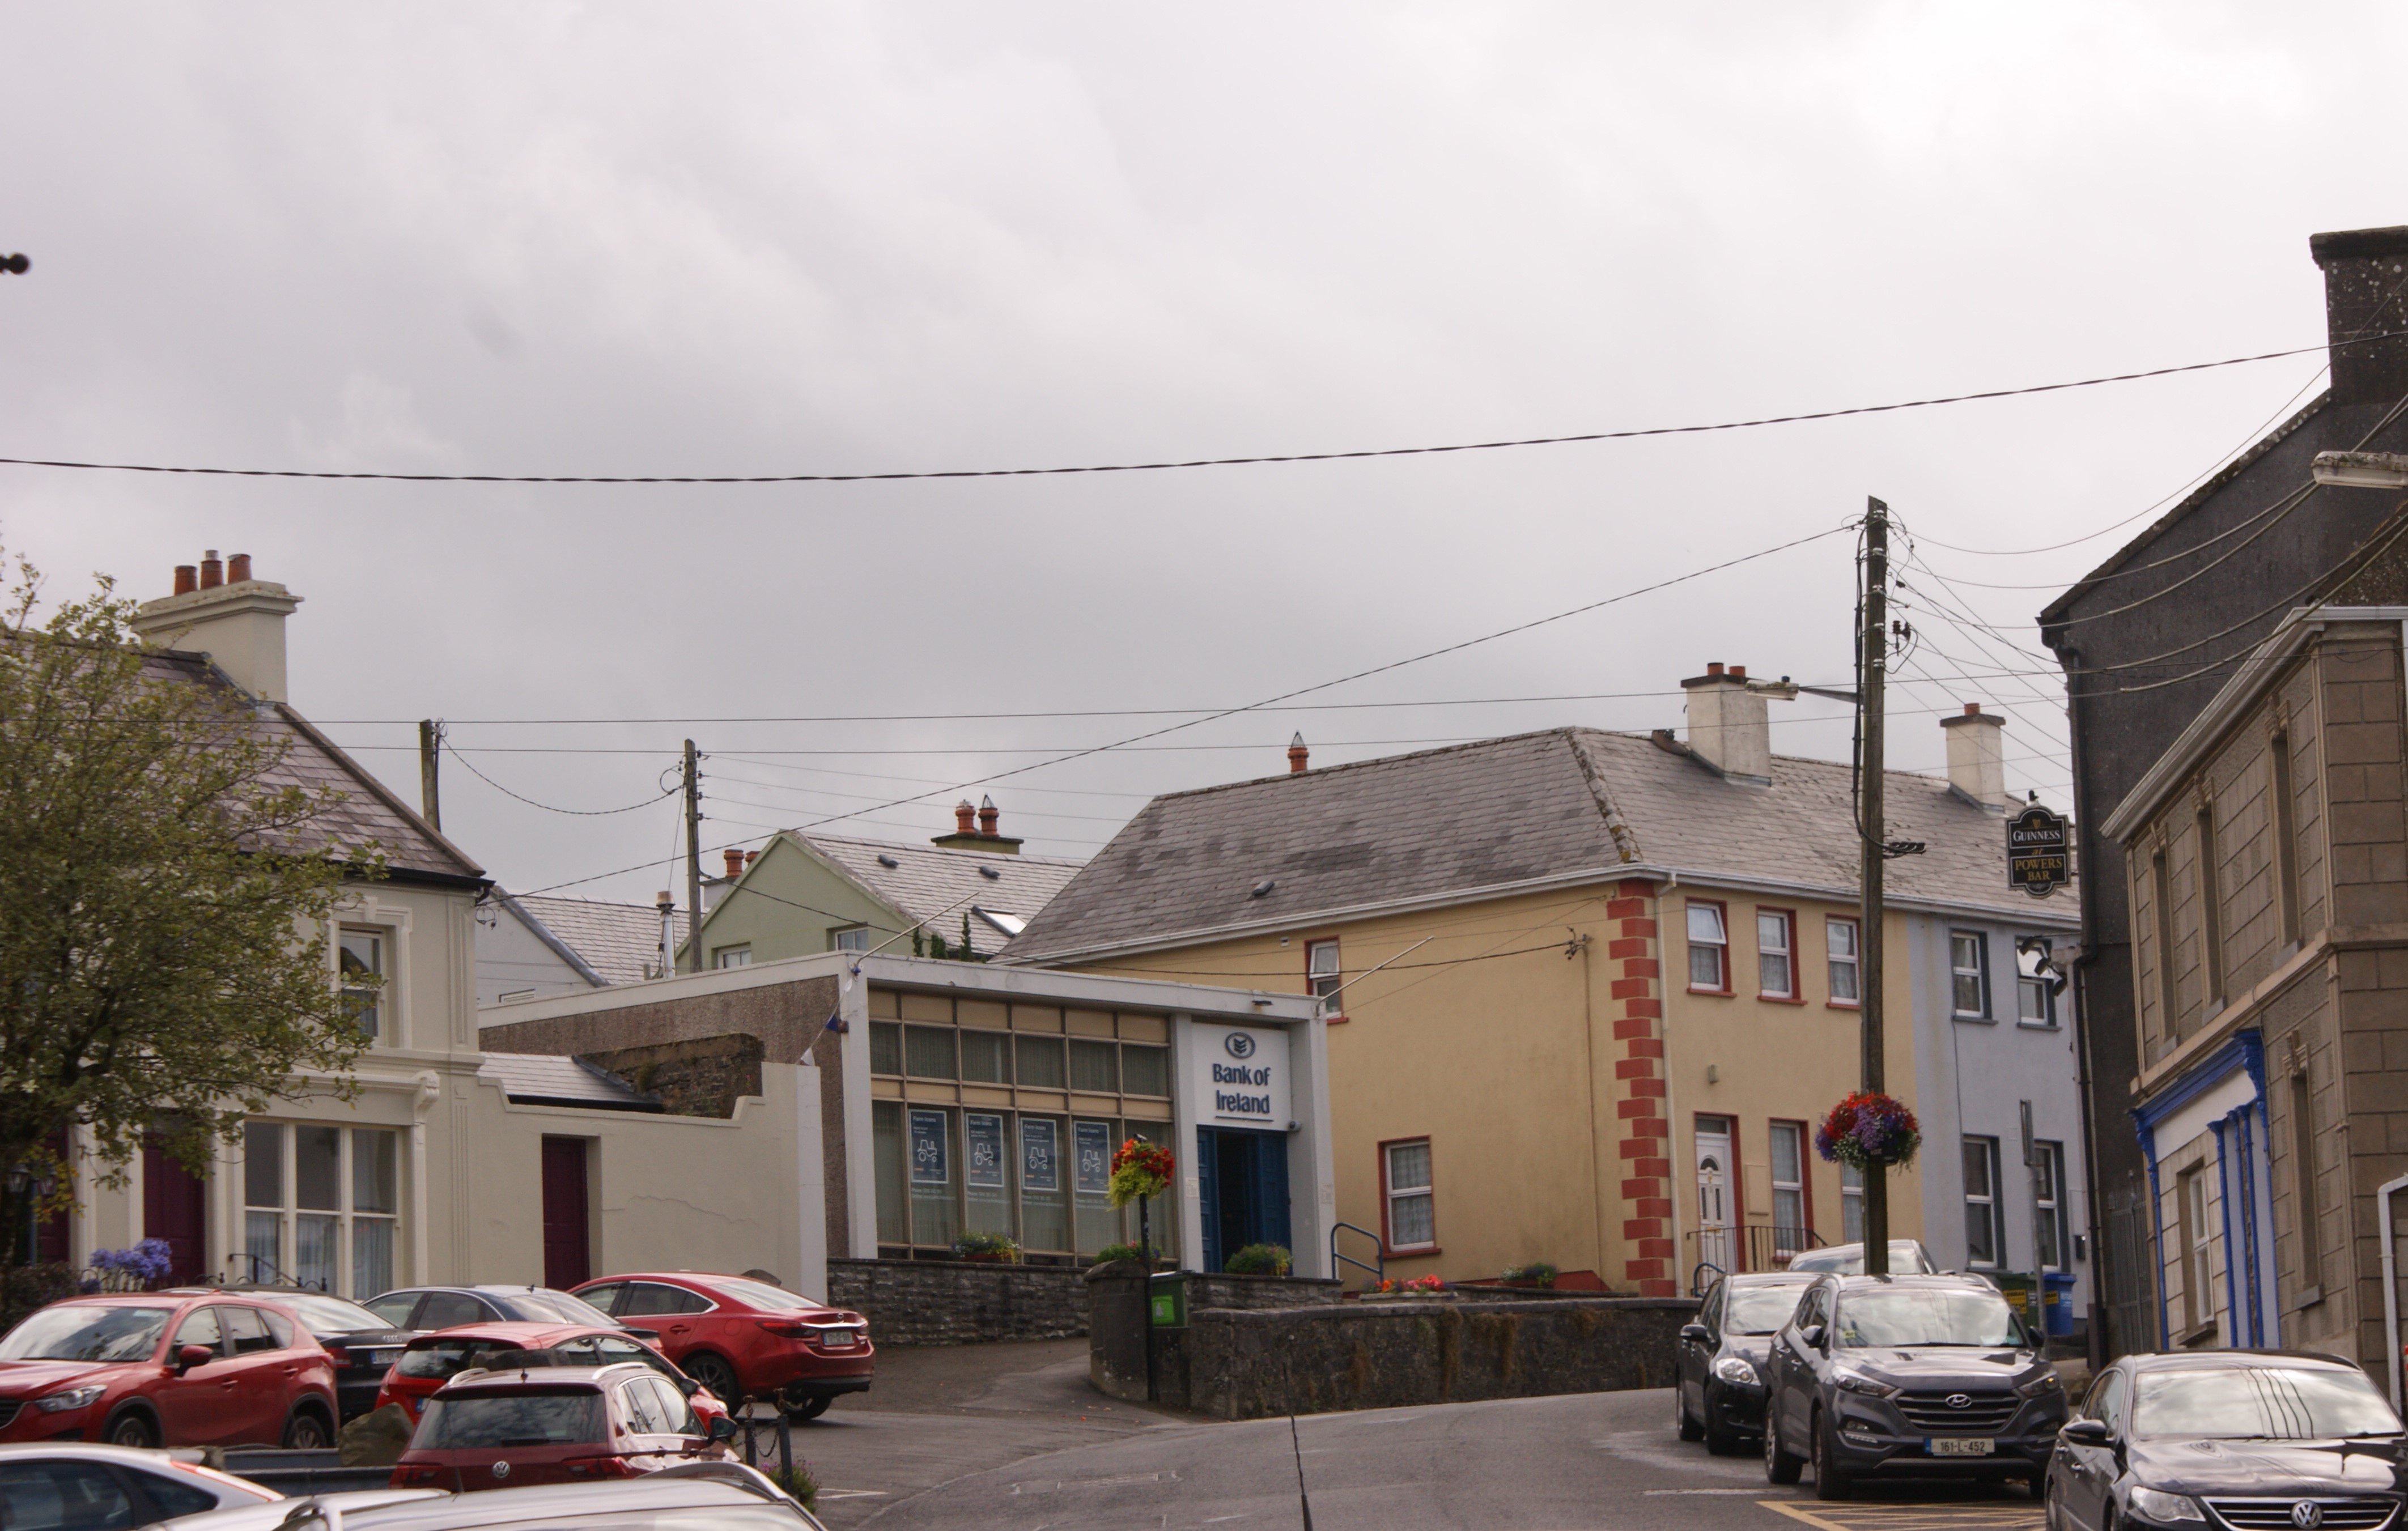 The 10 best hotels & places to stay in Miltown Malbay, Ireland 